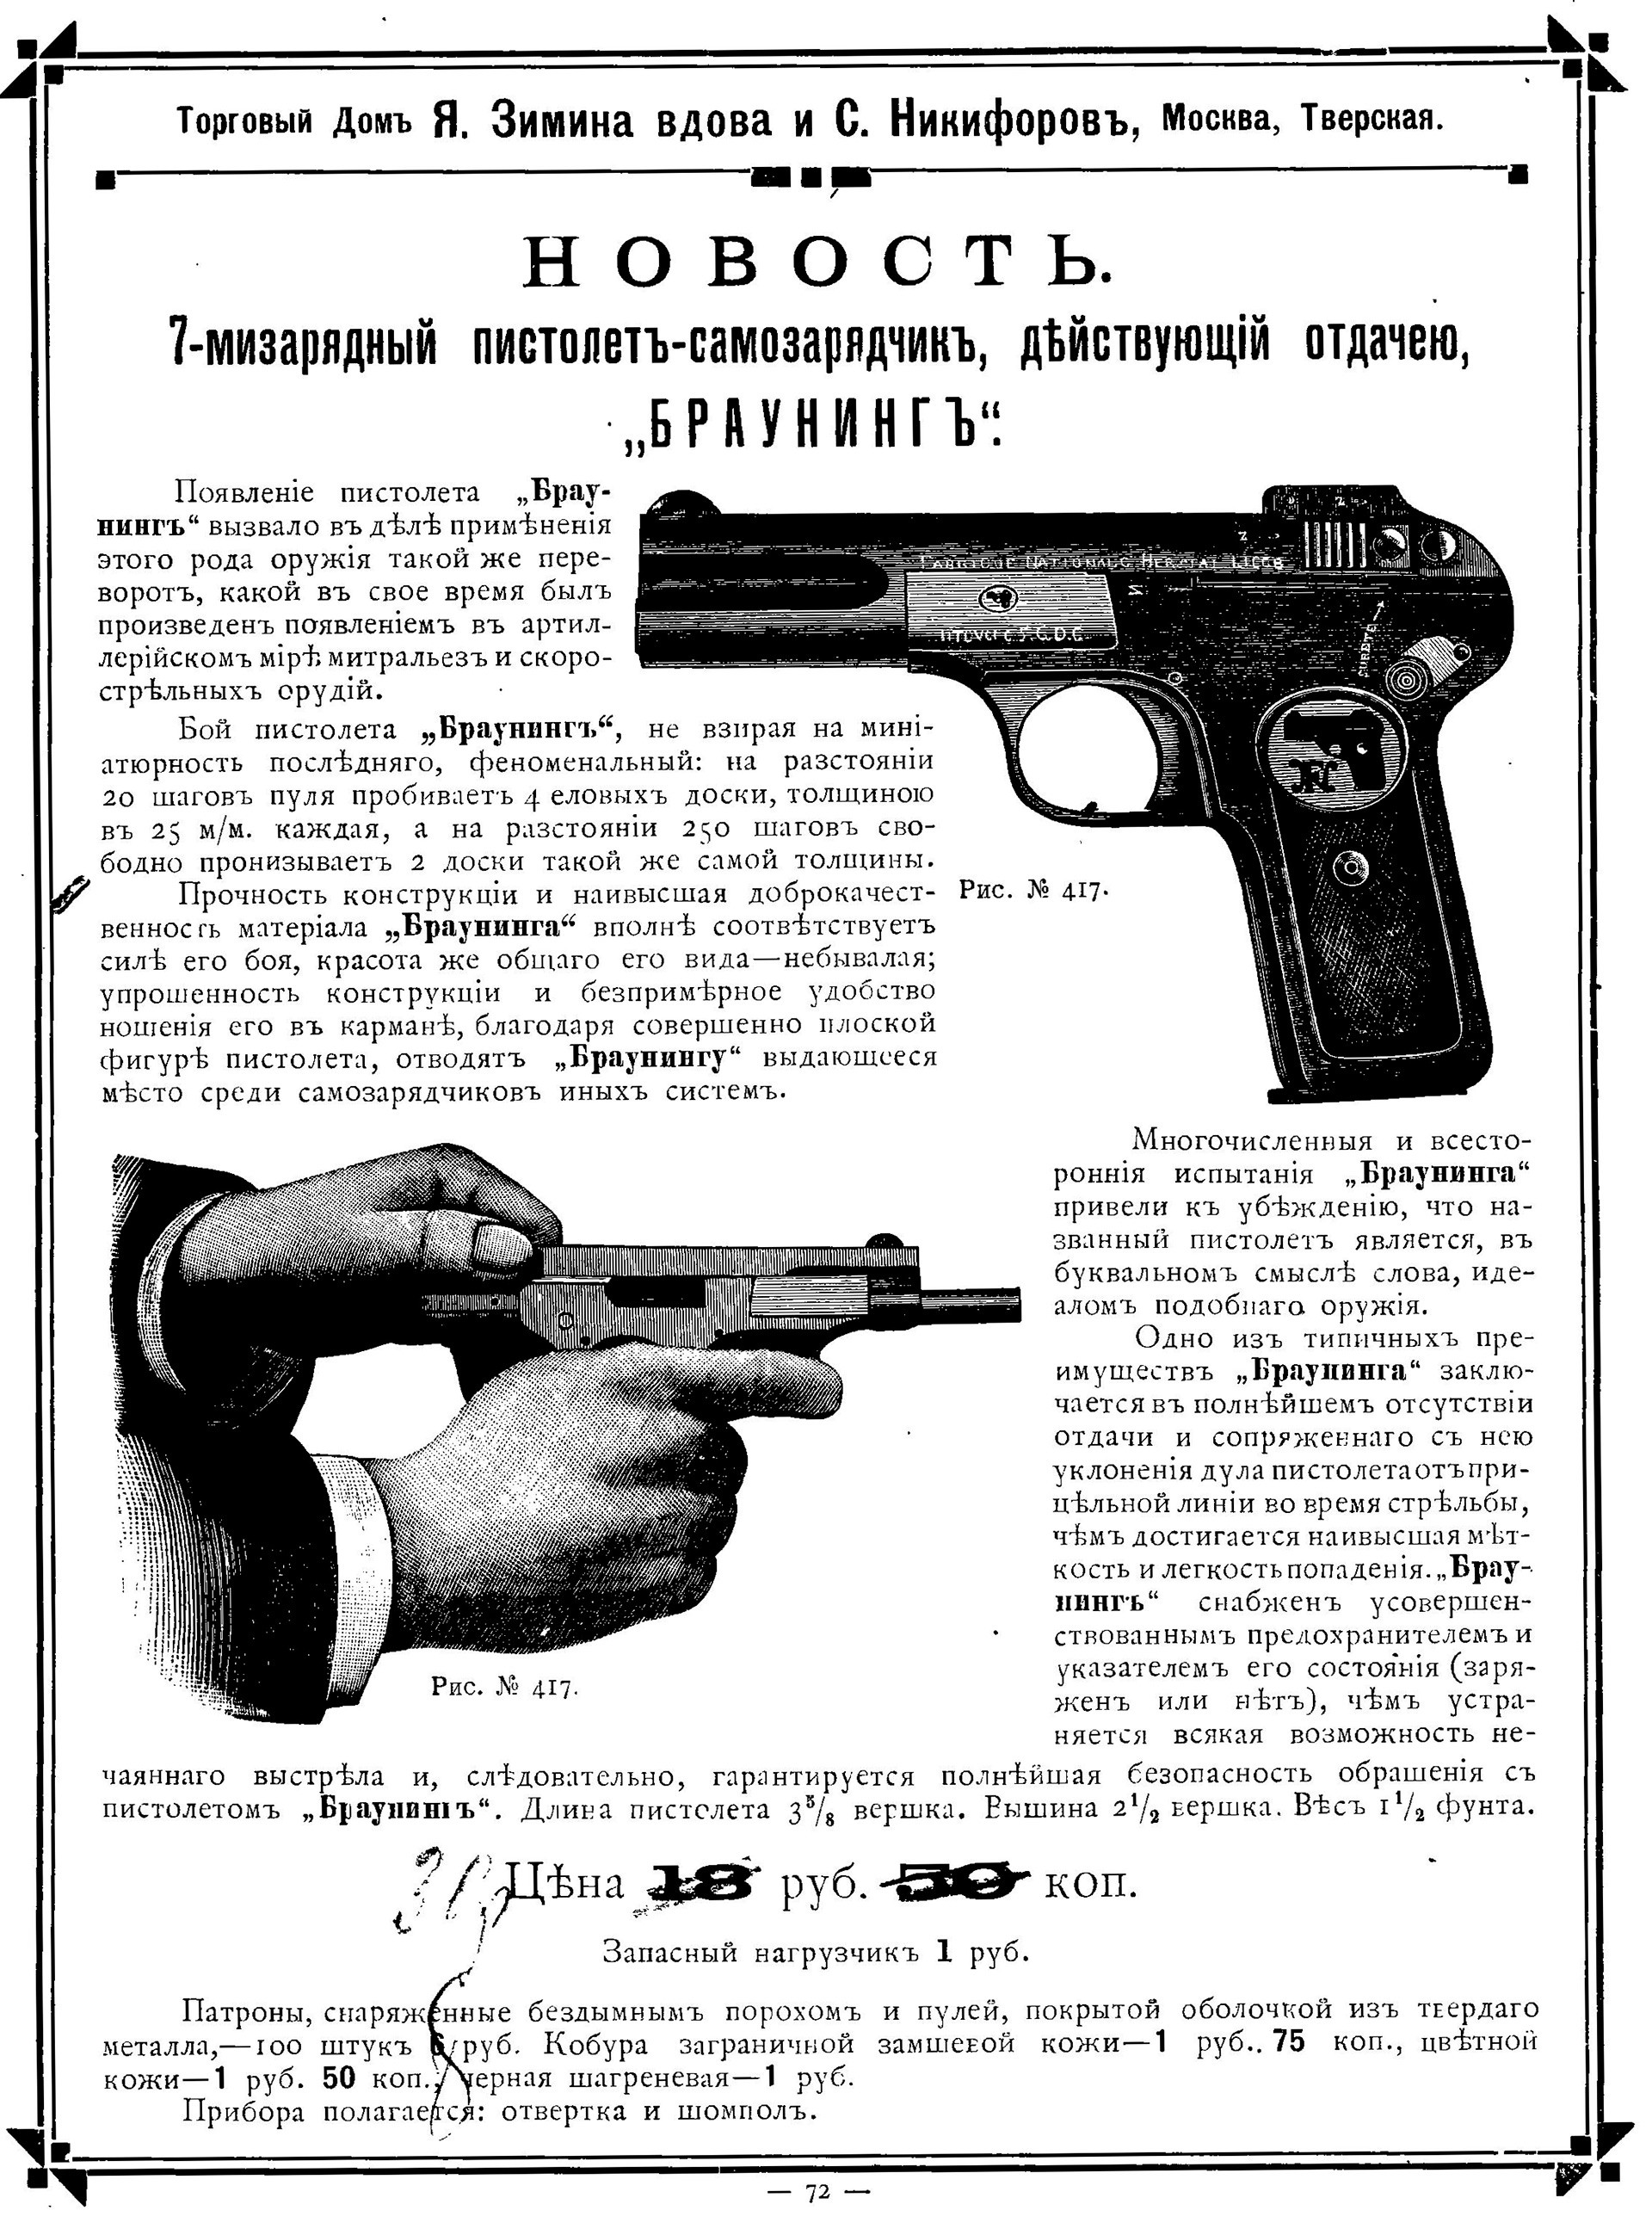 Newspapers advertised Brownings, Nagants, Mausers, and other models of handgun which were as popular as they were affordable.